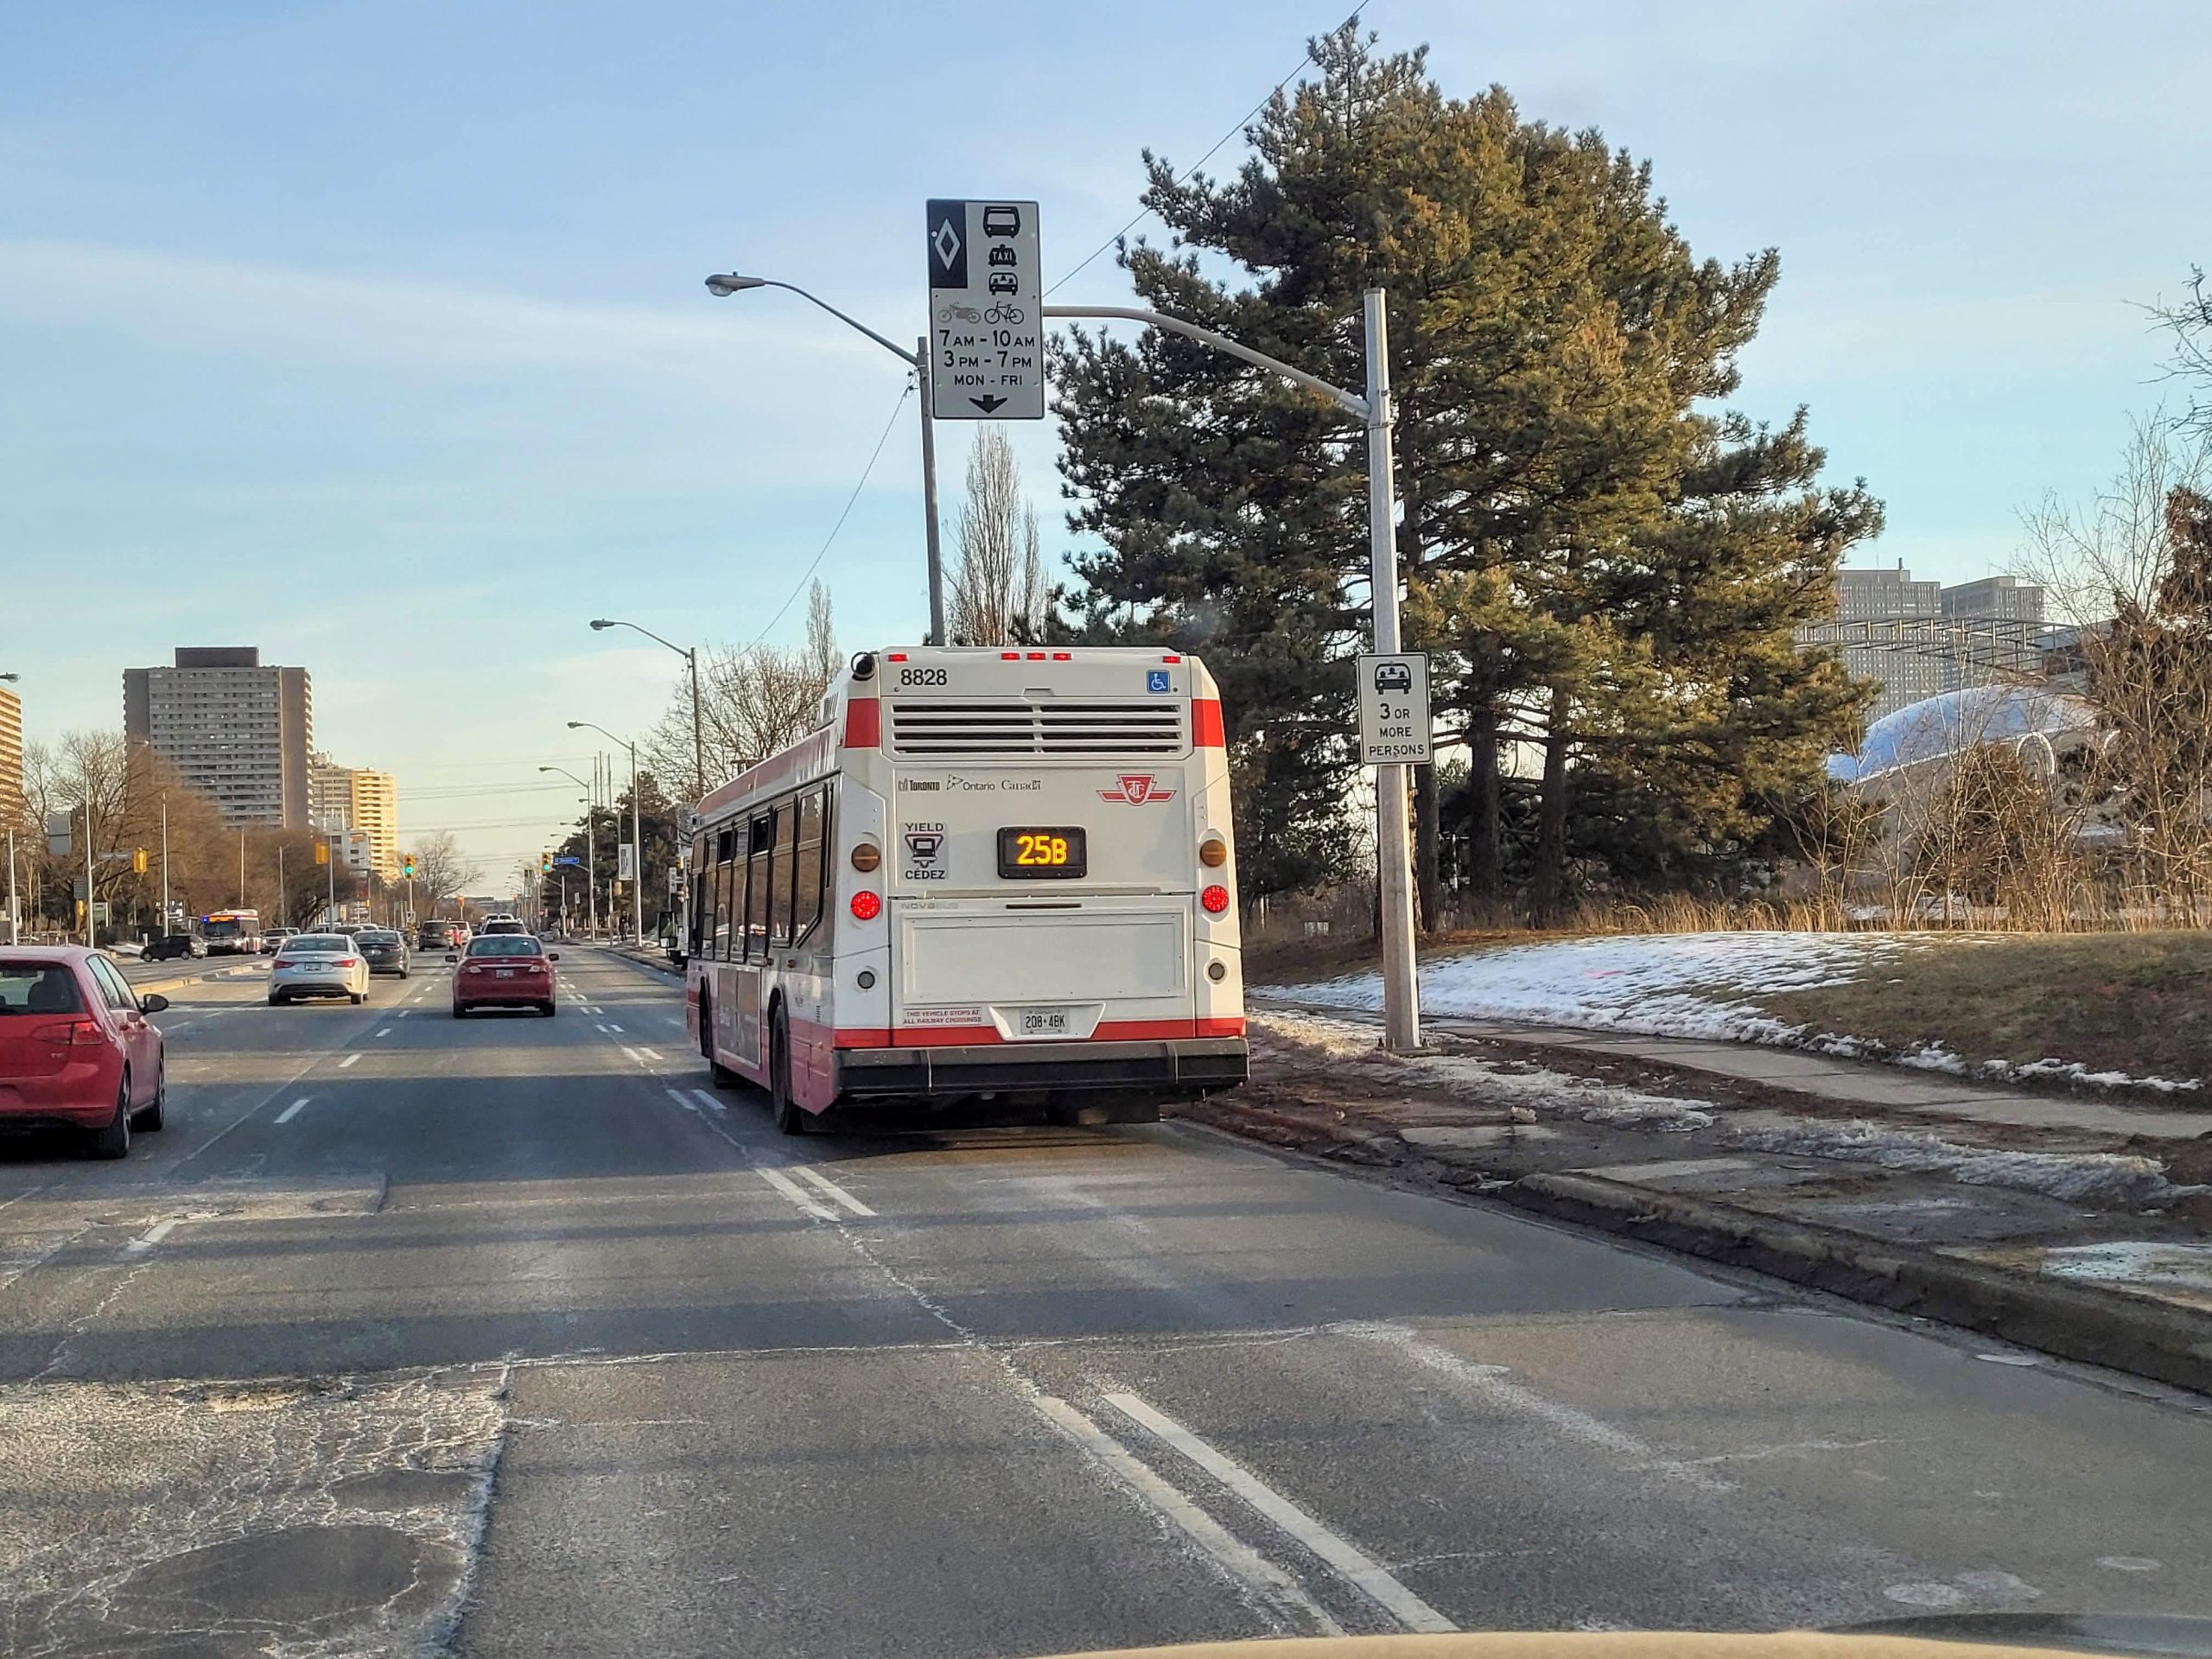 The 25B Don Mills bus travelling along a curbside HOV lane on Don Mills Road.